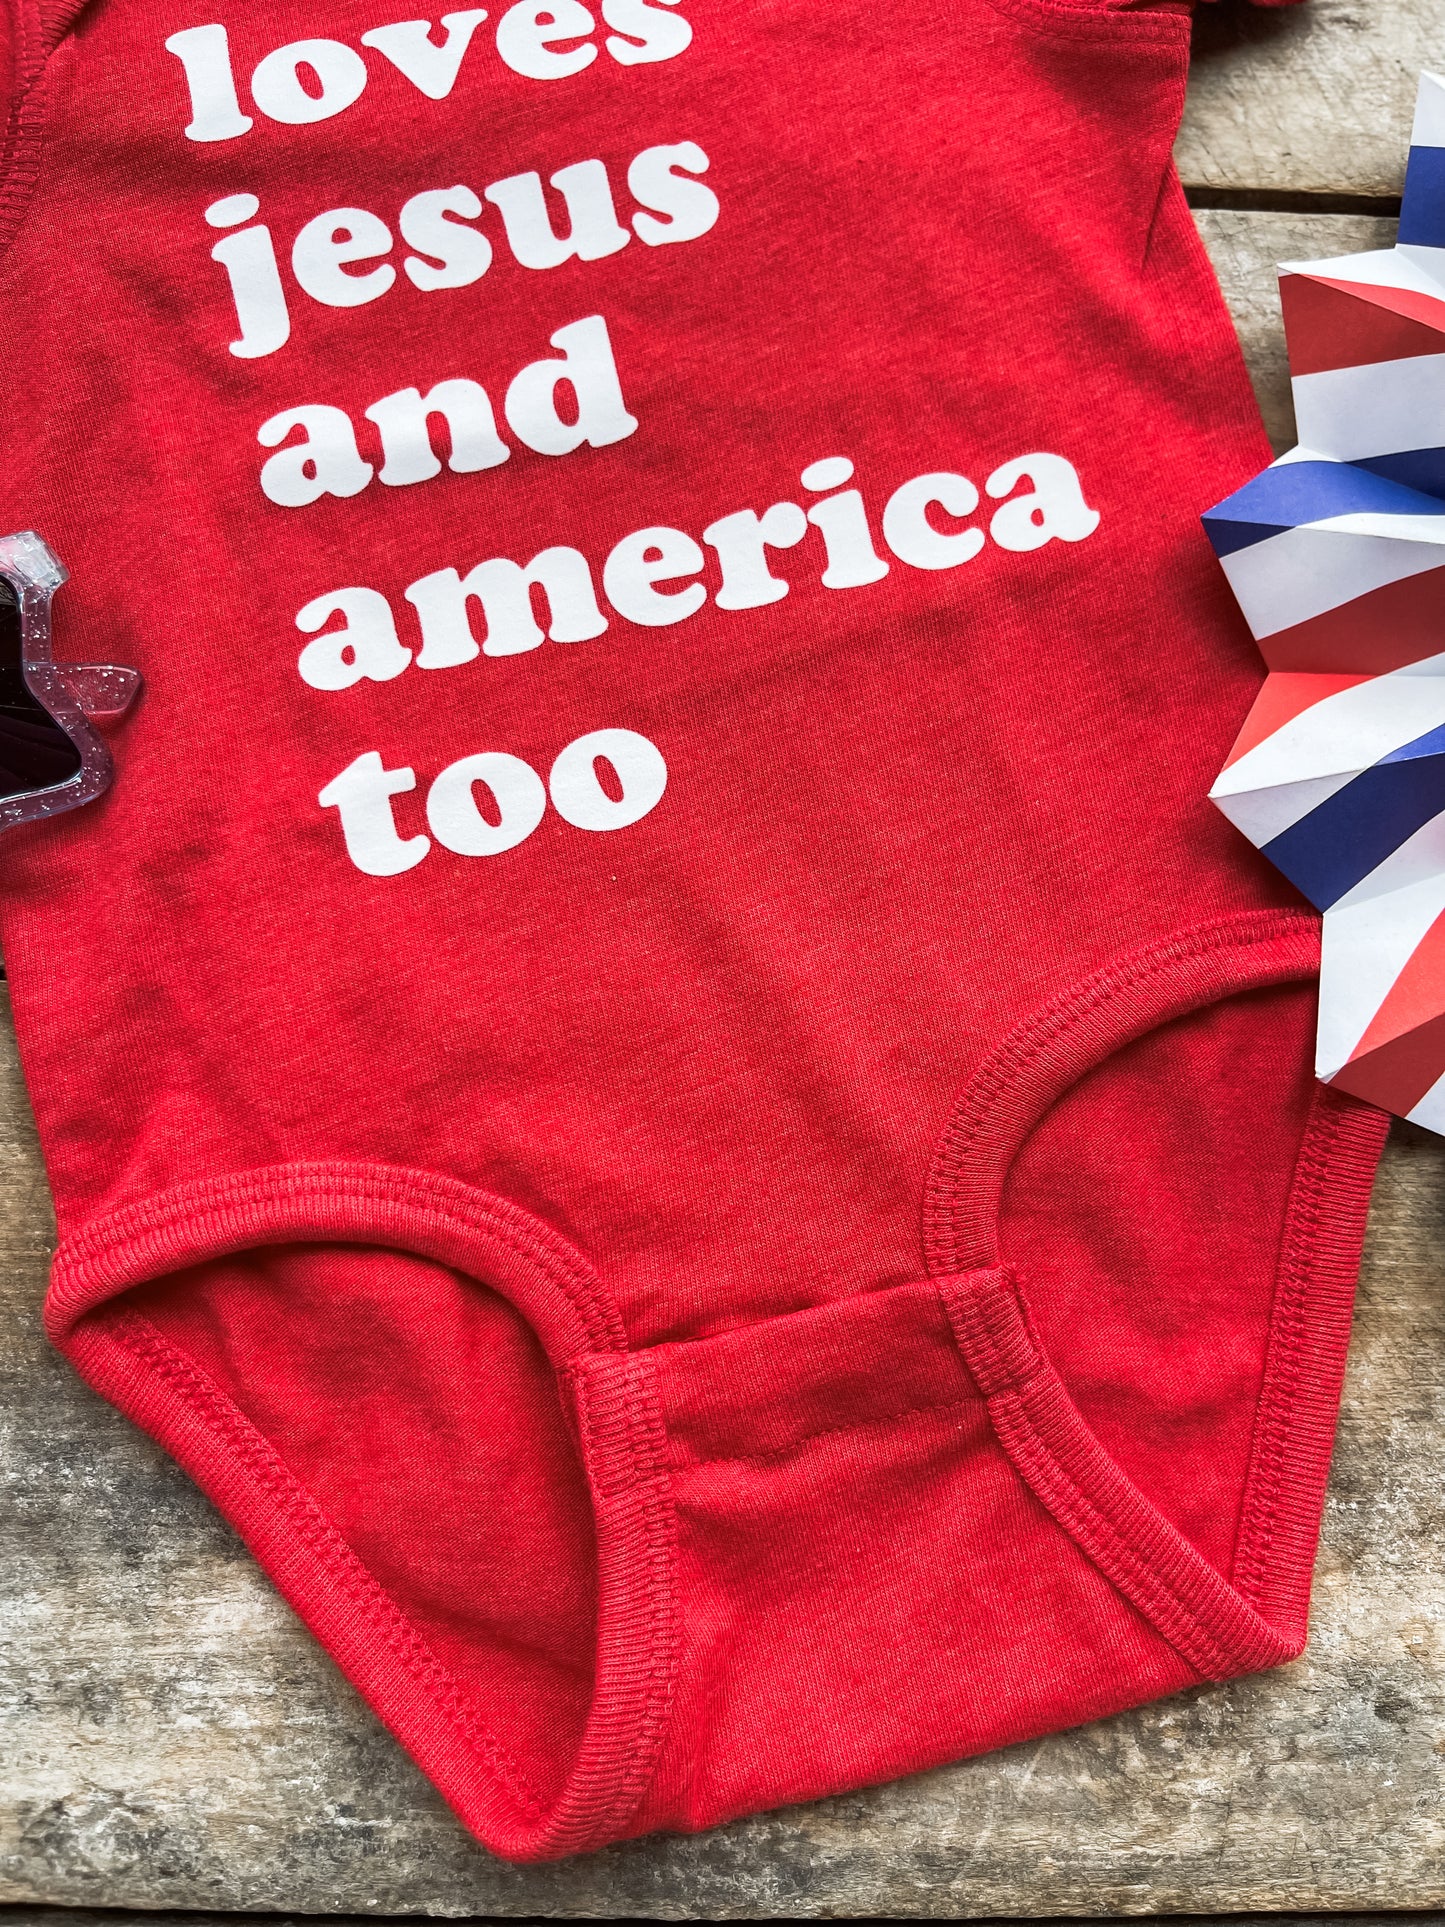 Loves Jesus and America too Infant One piece Body Suit